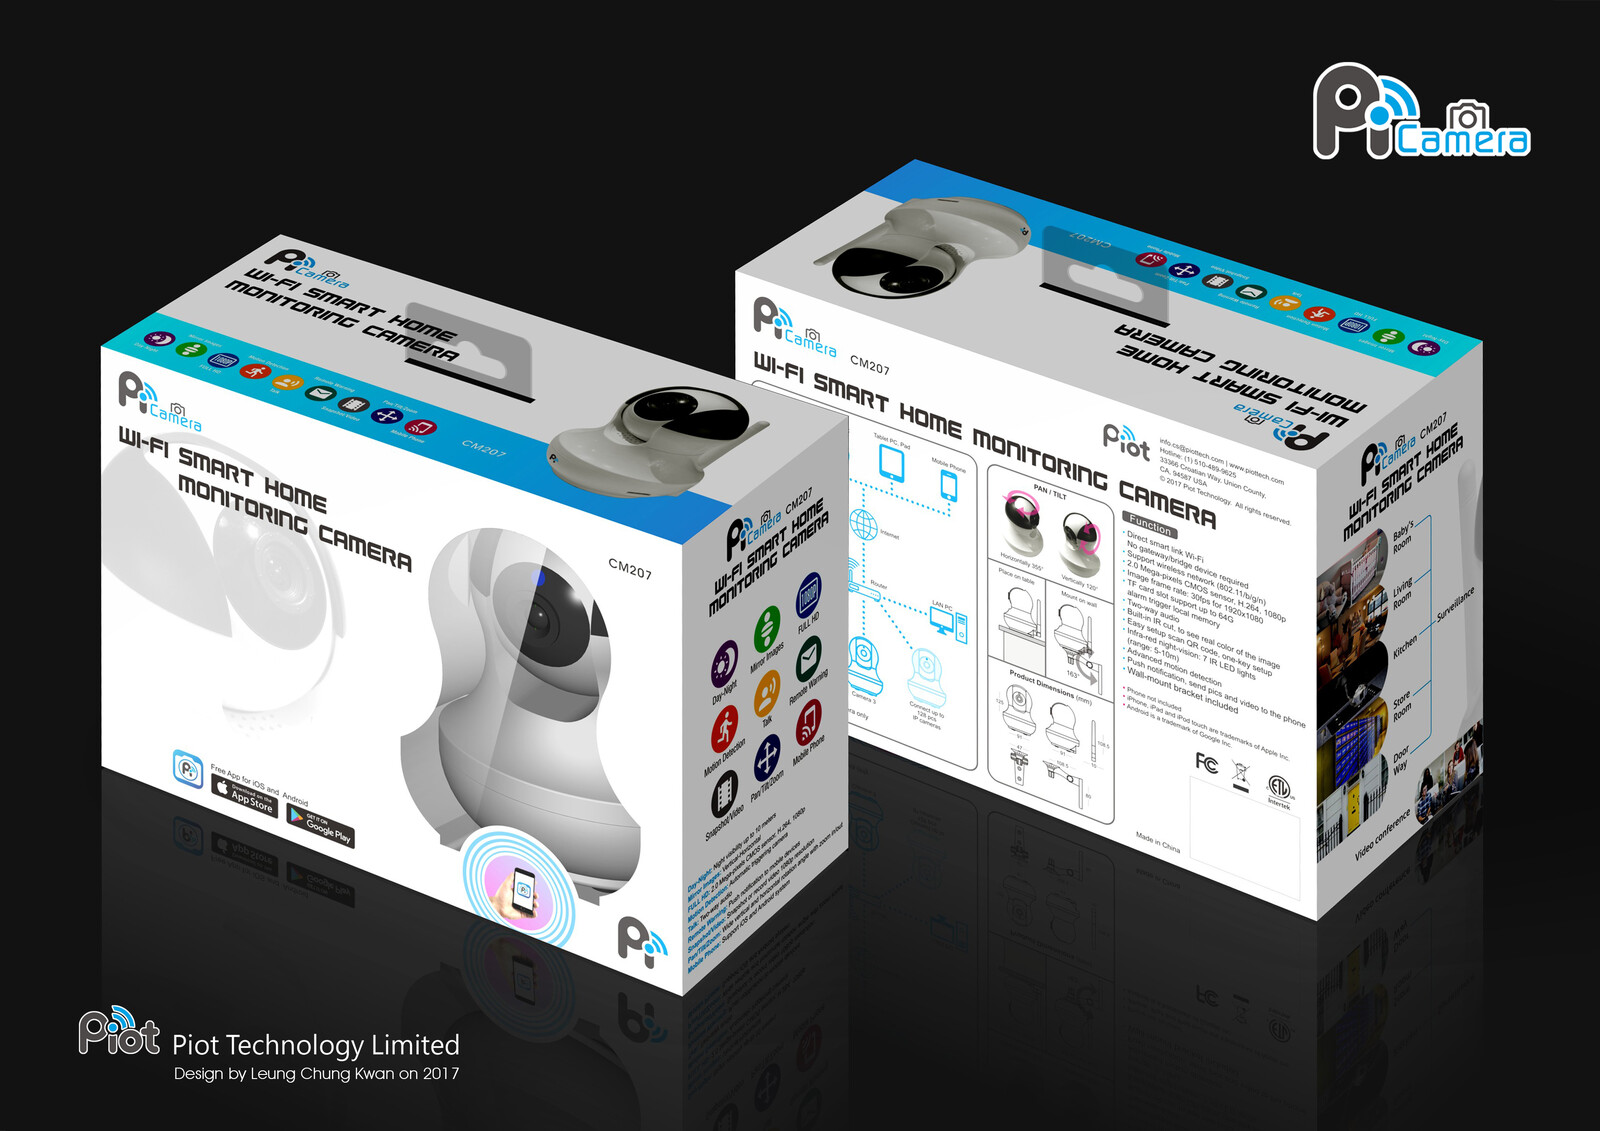 💎 Color Gift Box | Design by Leung Chung Kwan on 2017 💎
Product︰Wi-Fi Smart Home Monitoring Camera CM207 | Product Name︰Pi Camera
Brand Name︰Piot | Client︰Piot Technology Limited
Graphic Design Specification︰http://bit.ly/pi056-v4